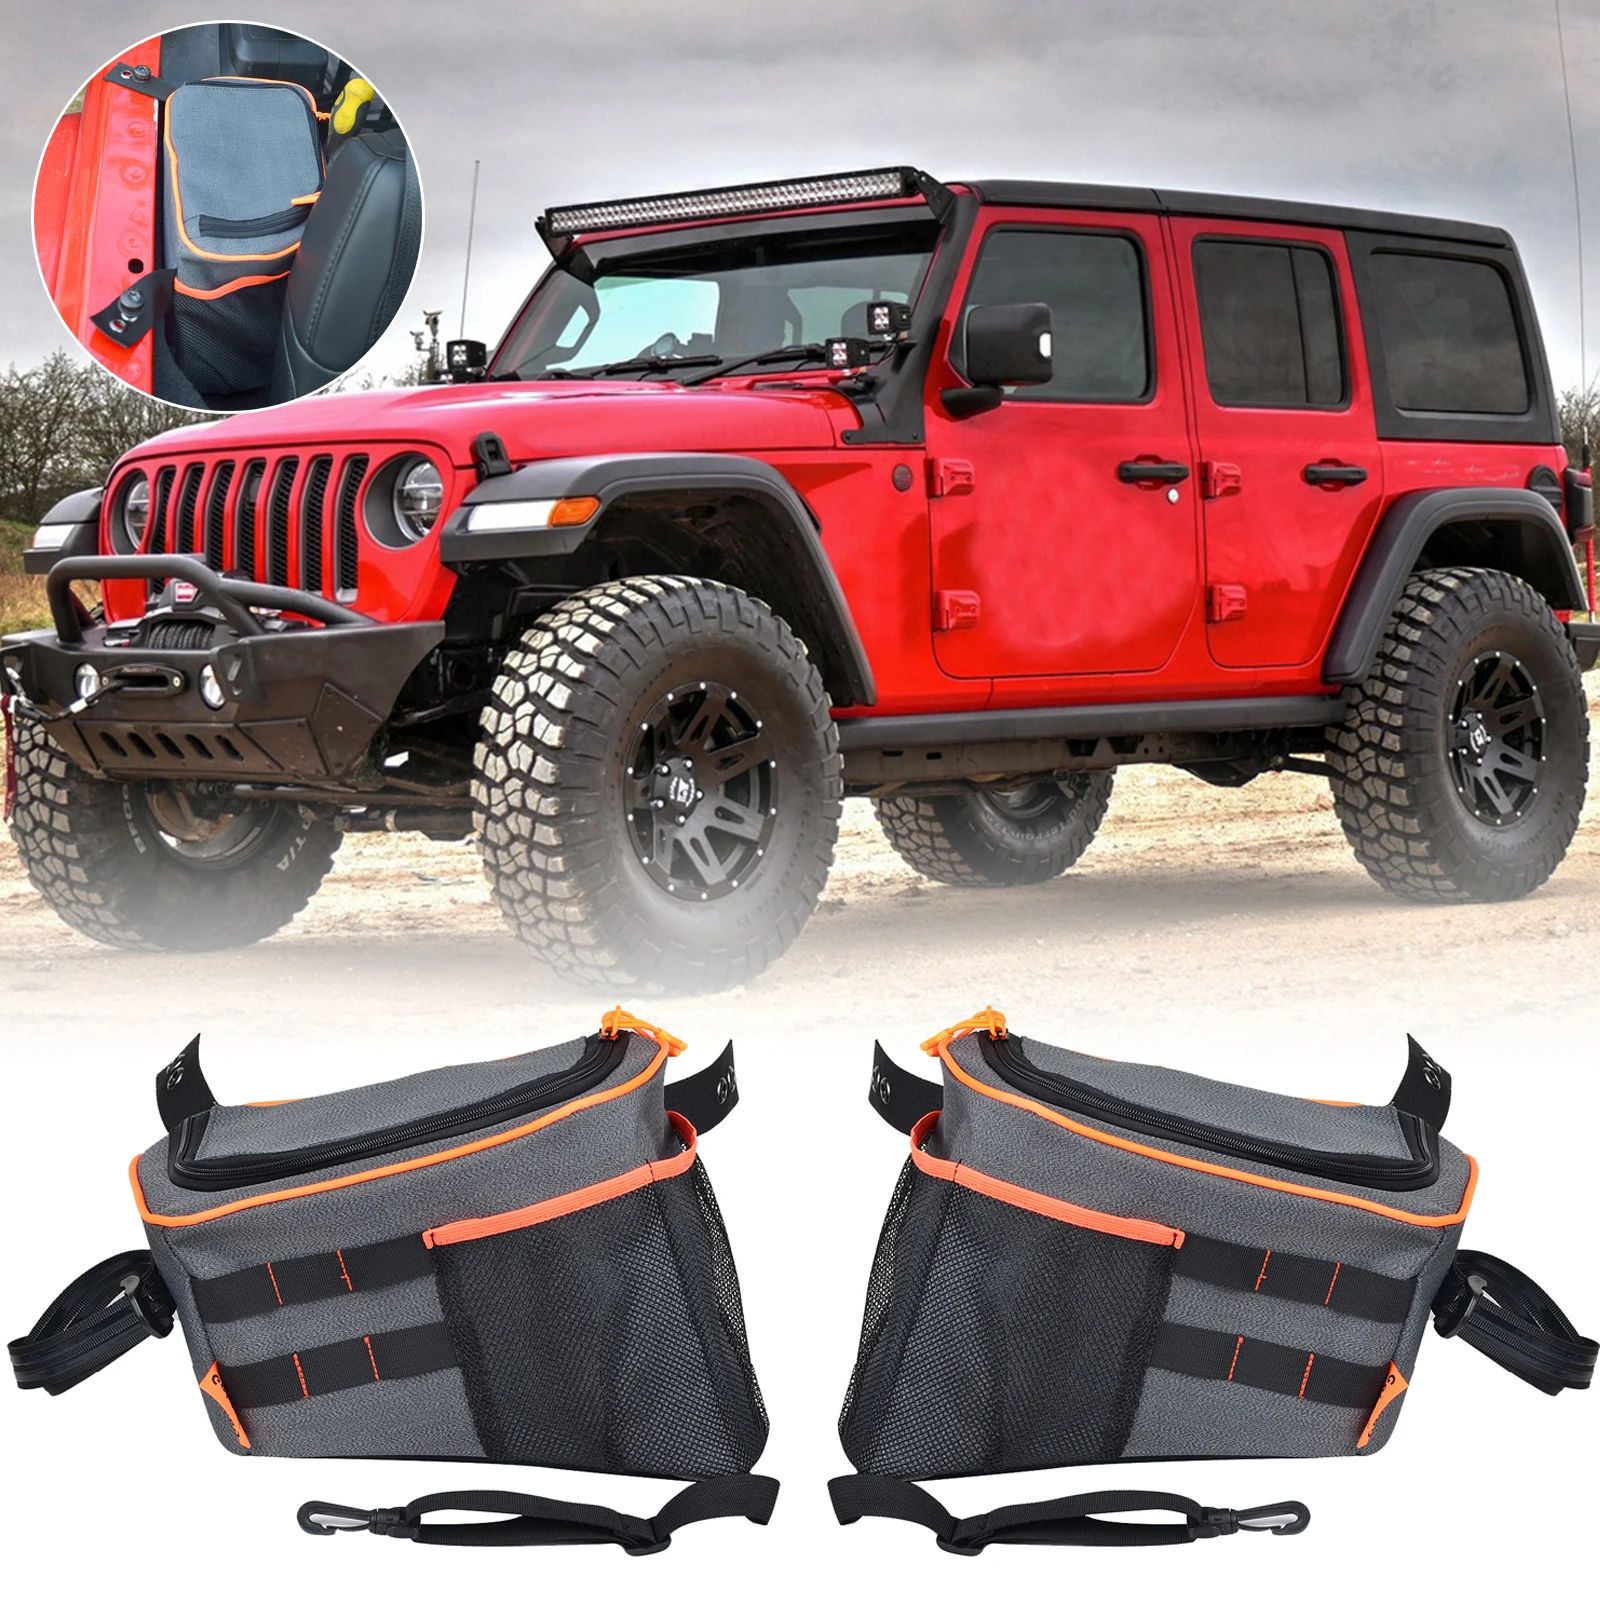 Interior Accessories Wheel Well Side Storage Bag Rear Trunk Organizer tool Bag with Grab Handles For 2018-2021 Jeep Wrangler JL